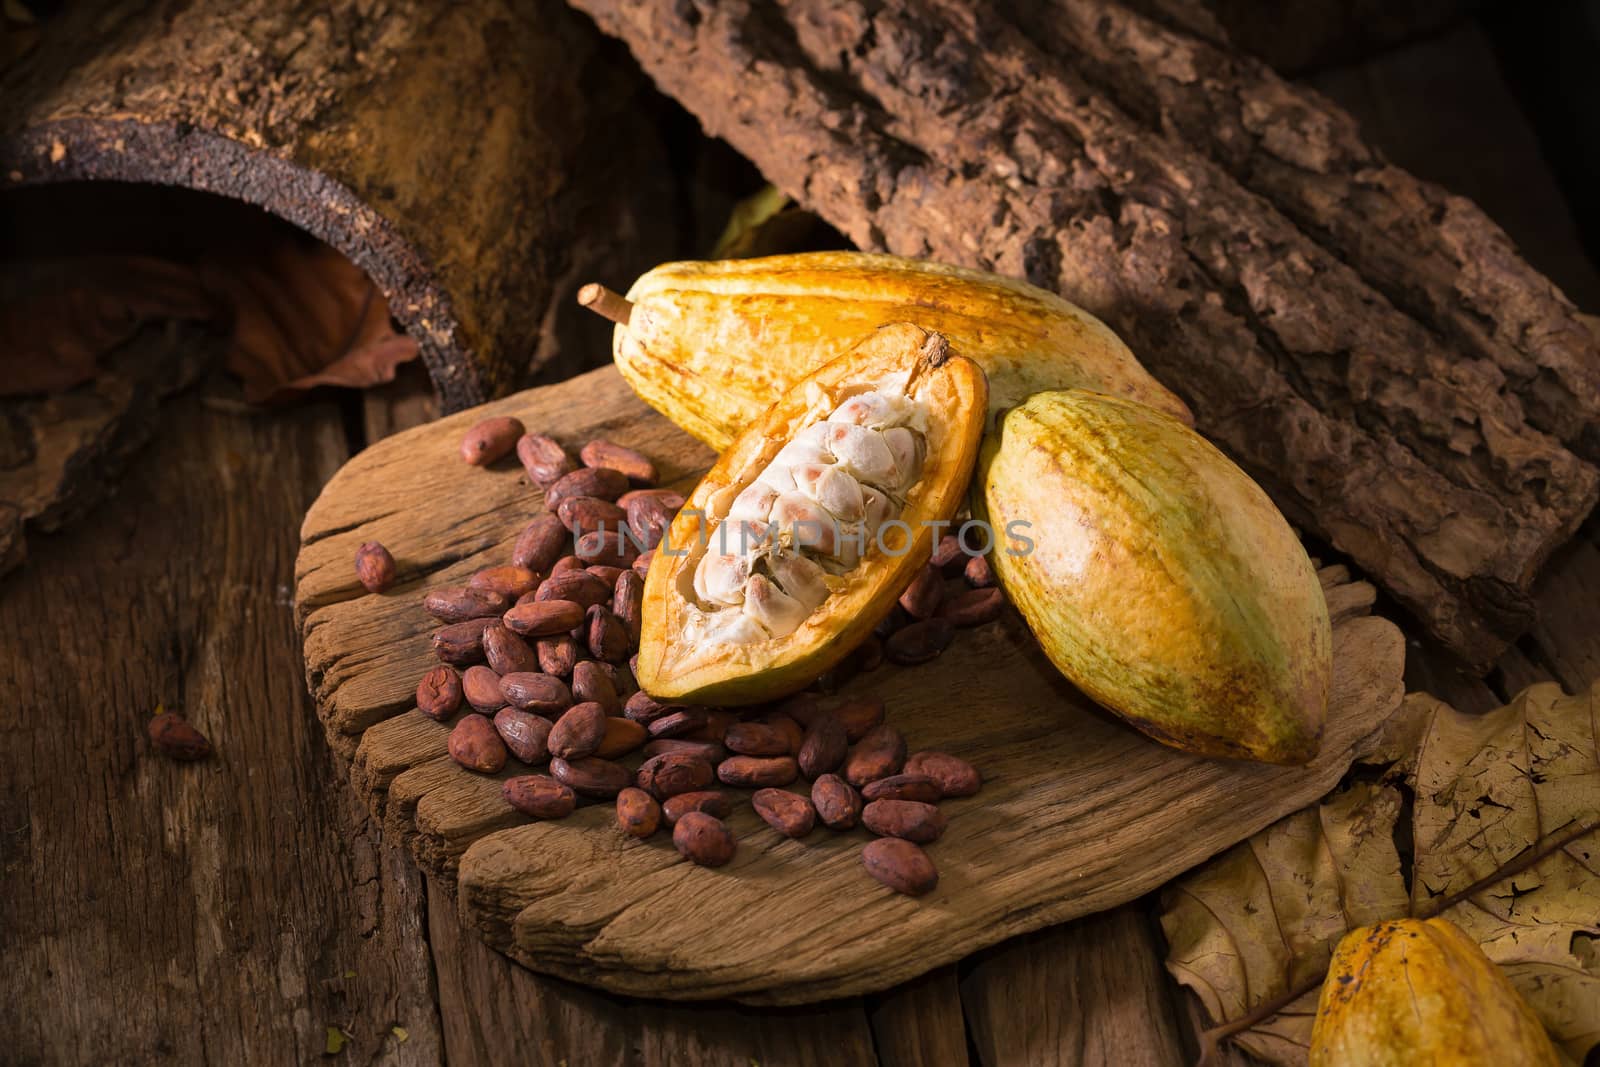 Cacao fruit, raw cacao beans, Cocoa pod on wooden background.